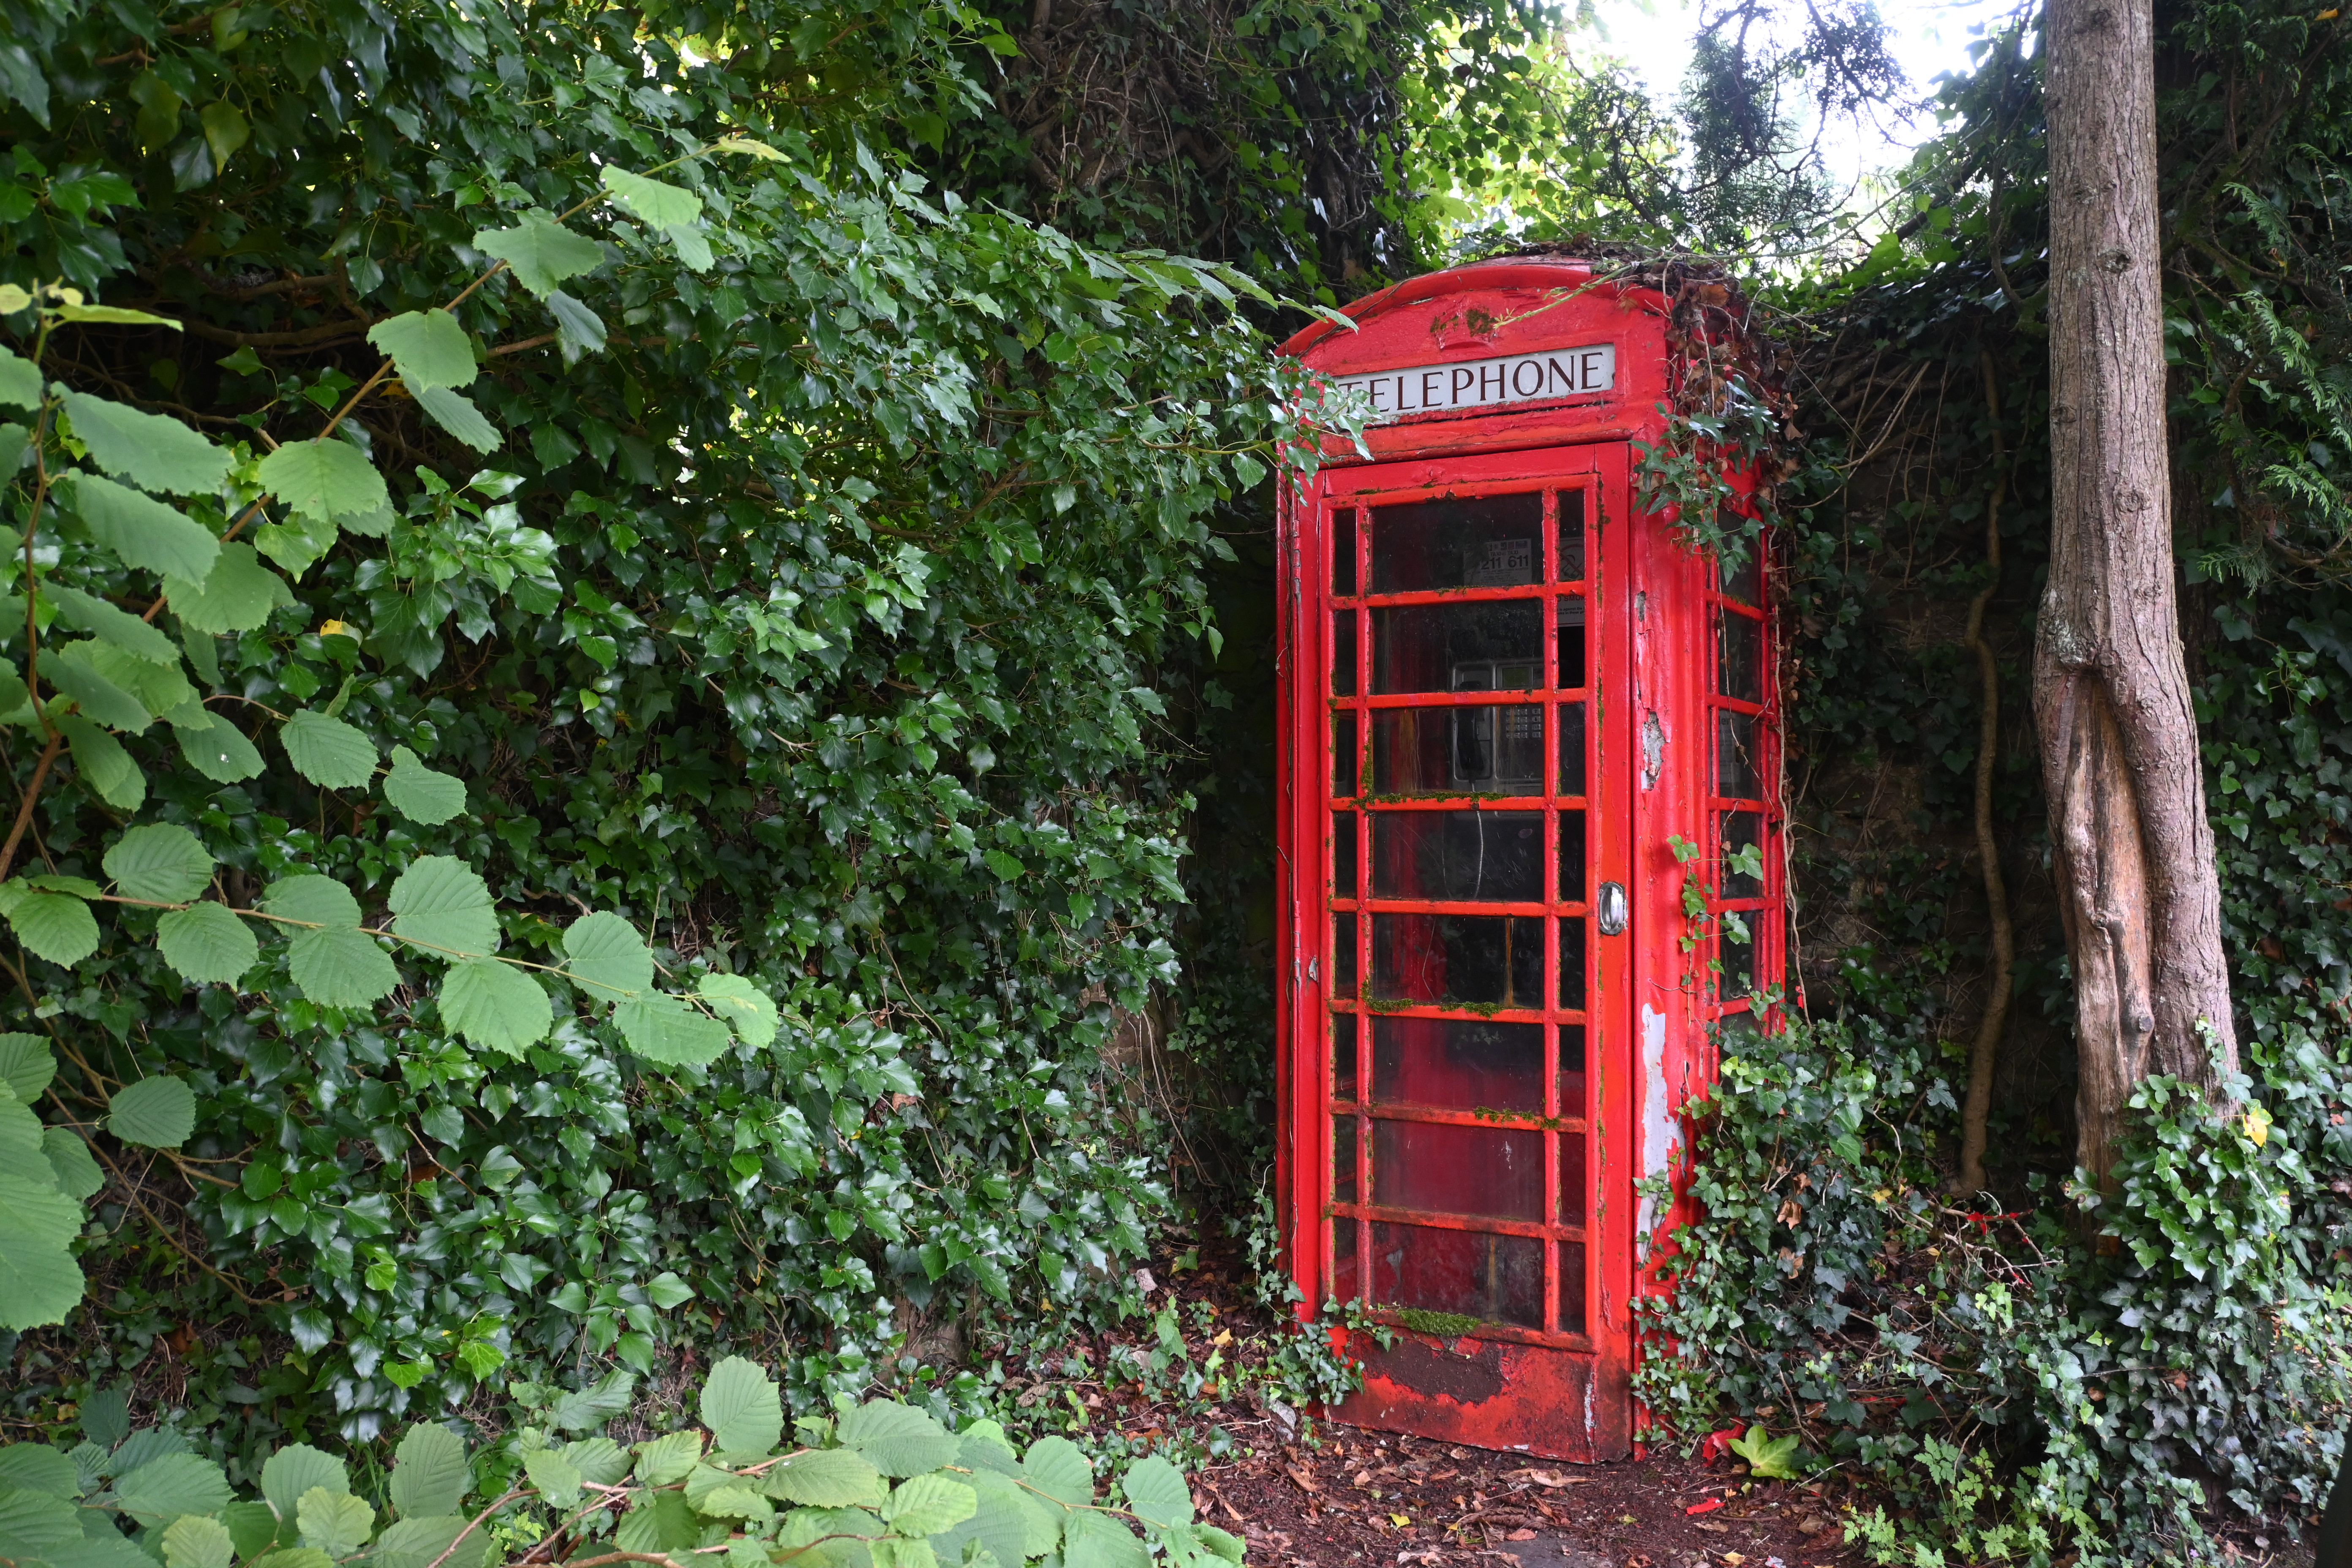 A red phone box surrounded by foliage